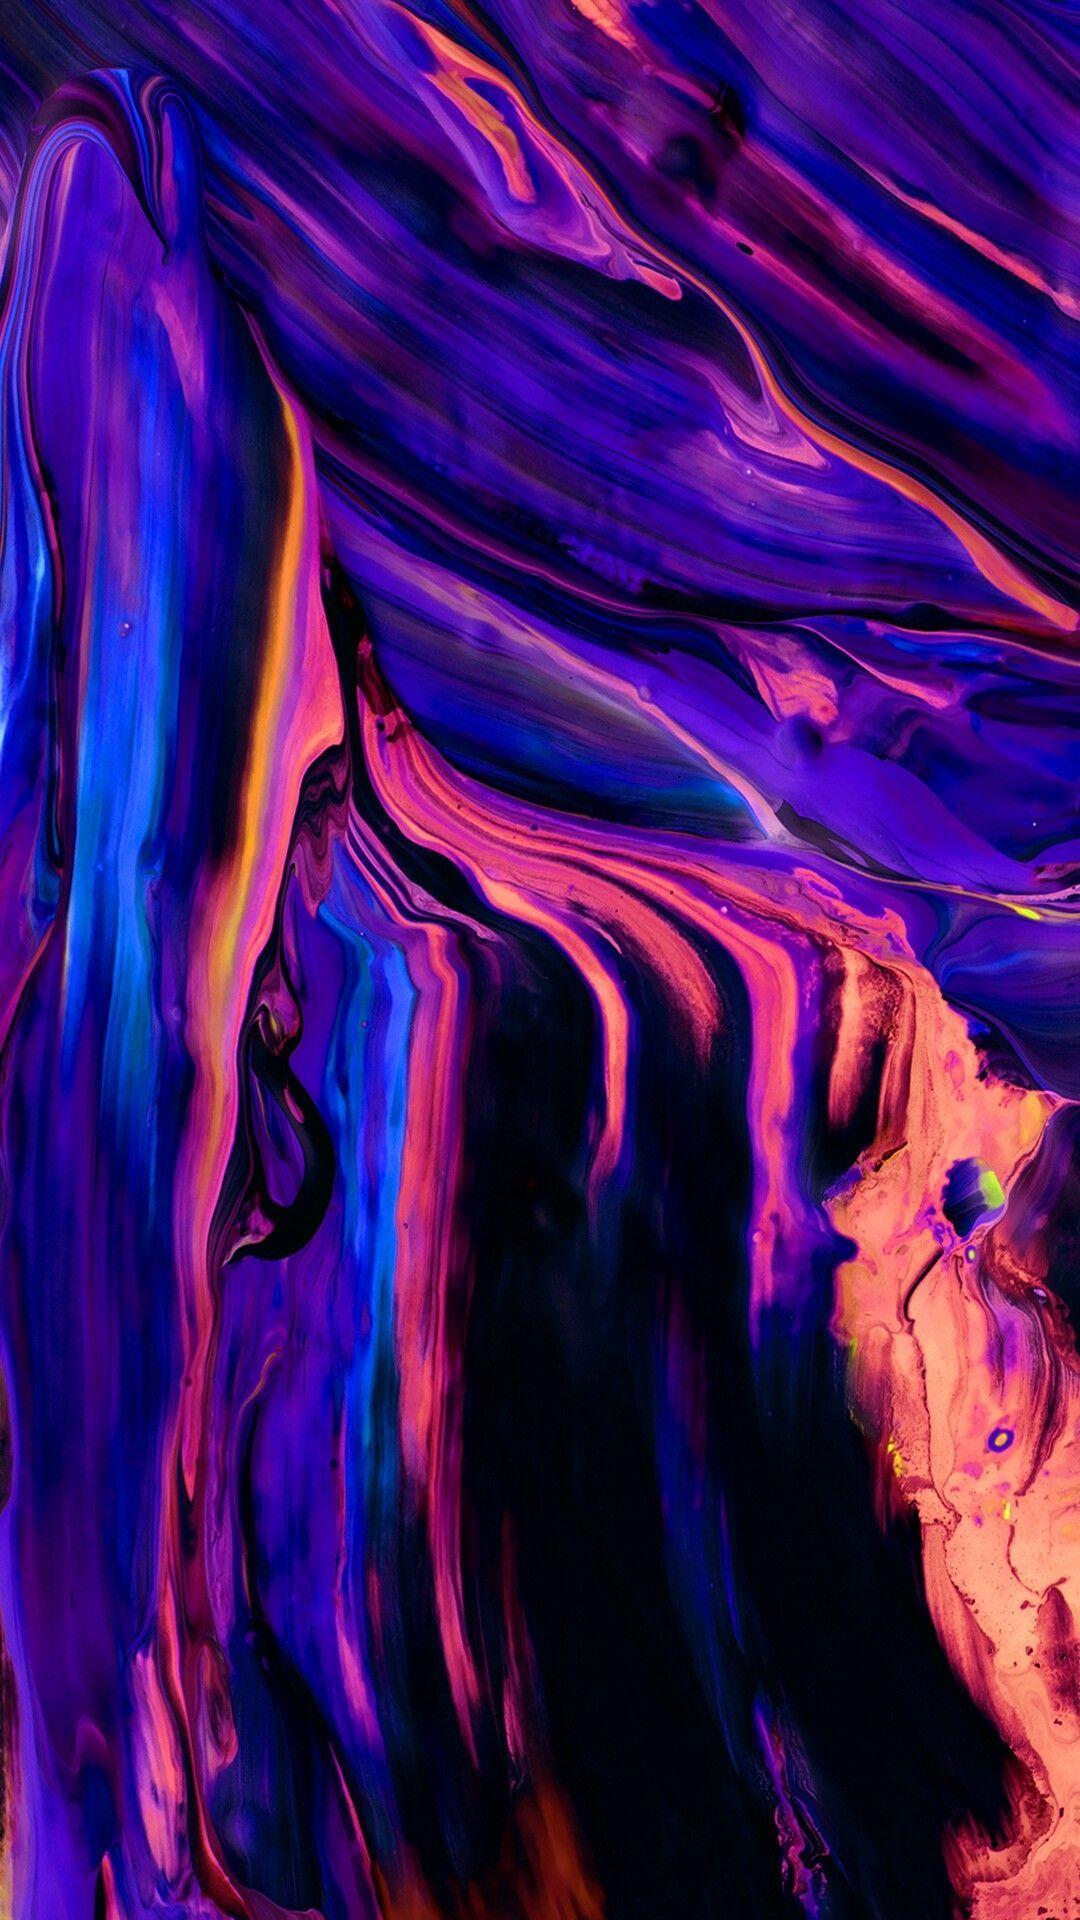 Abstract Iphone Wallpapers